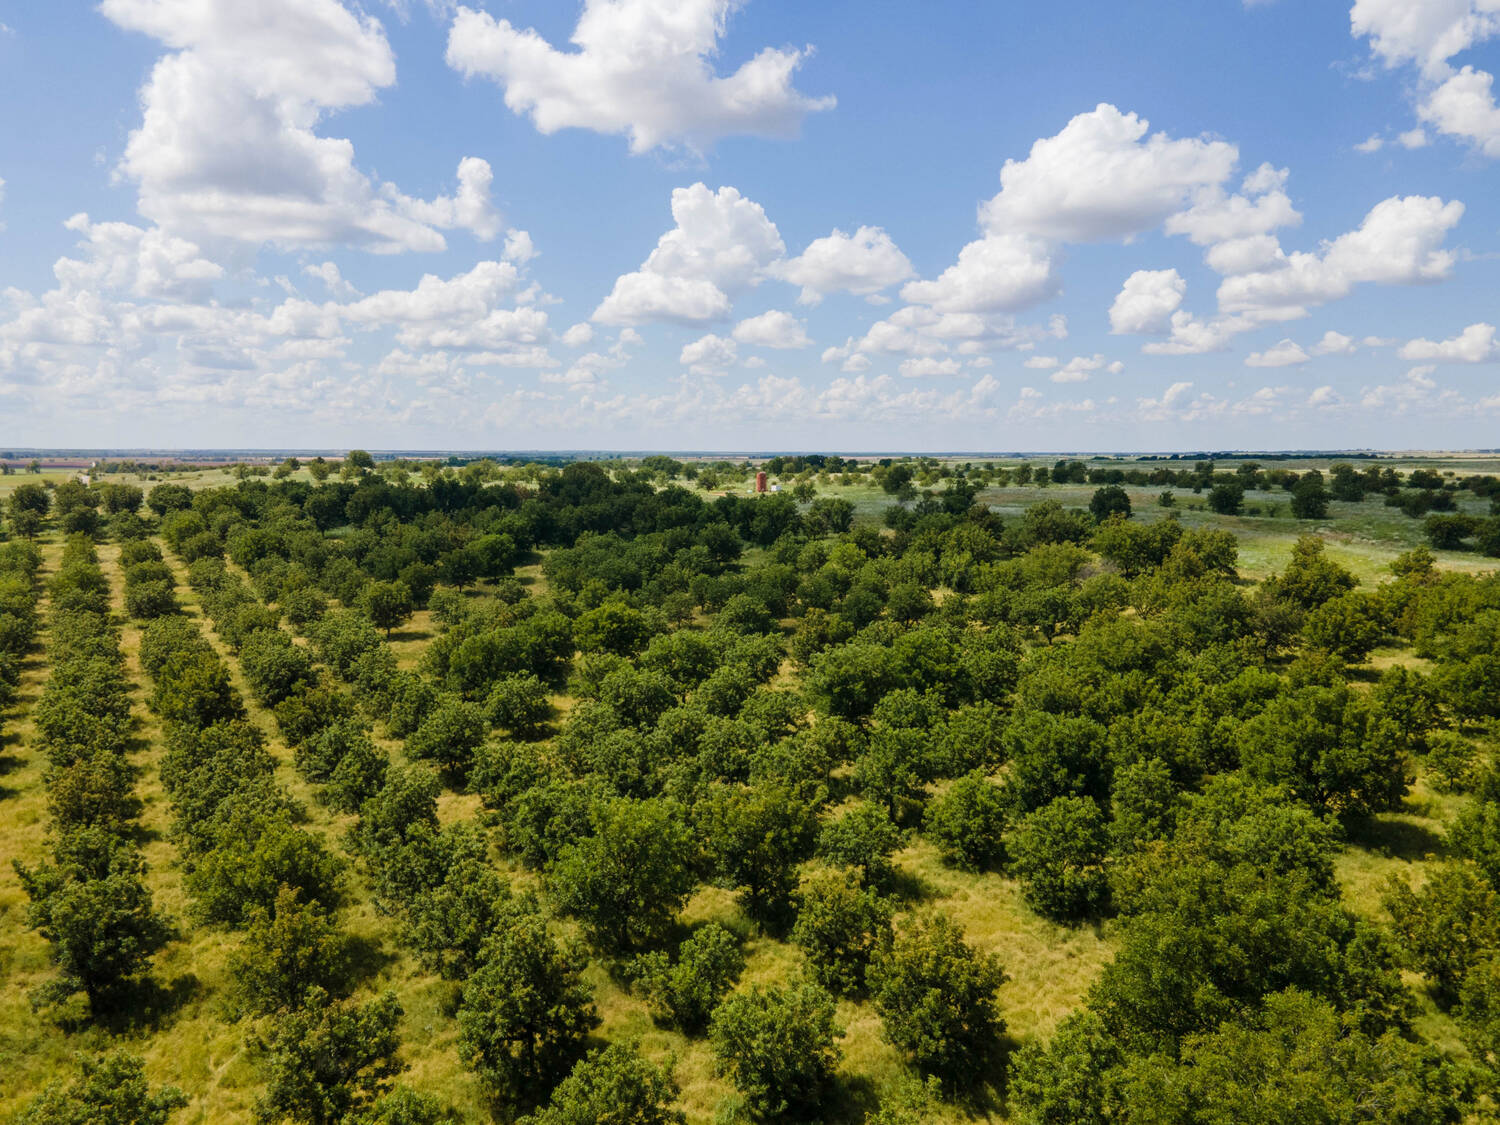 The-Pecan-Tract-Clay-County-Pecan-Orchard-Hunting-Ranch-TX-Republic-Ranches-Bryan-Pickens-11-of-15